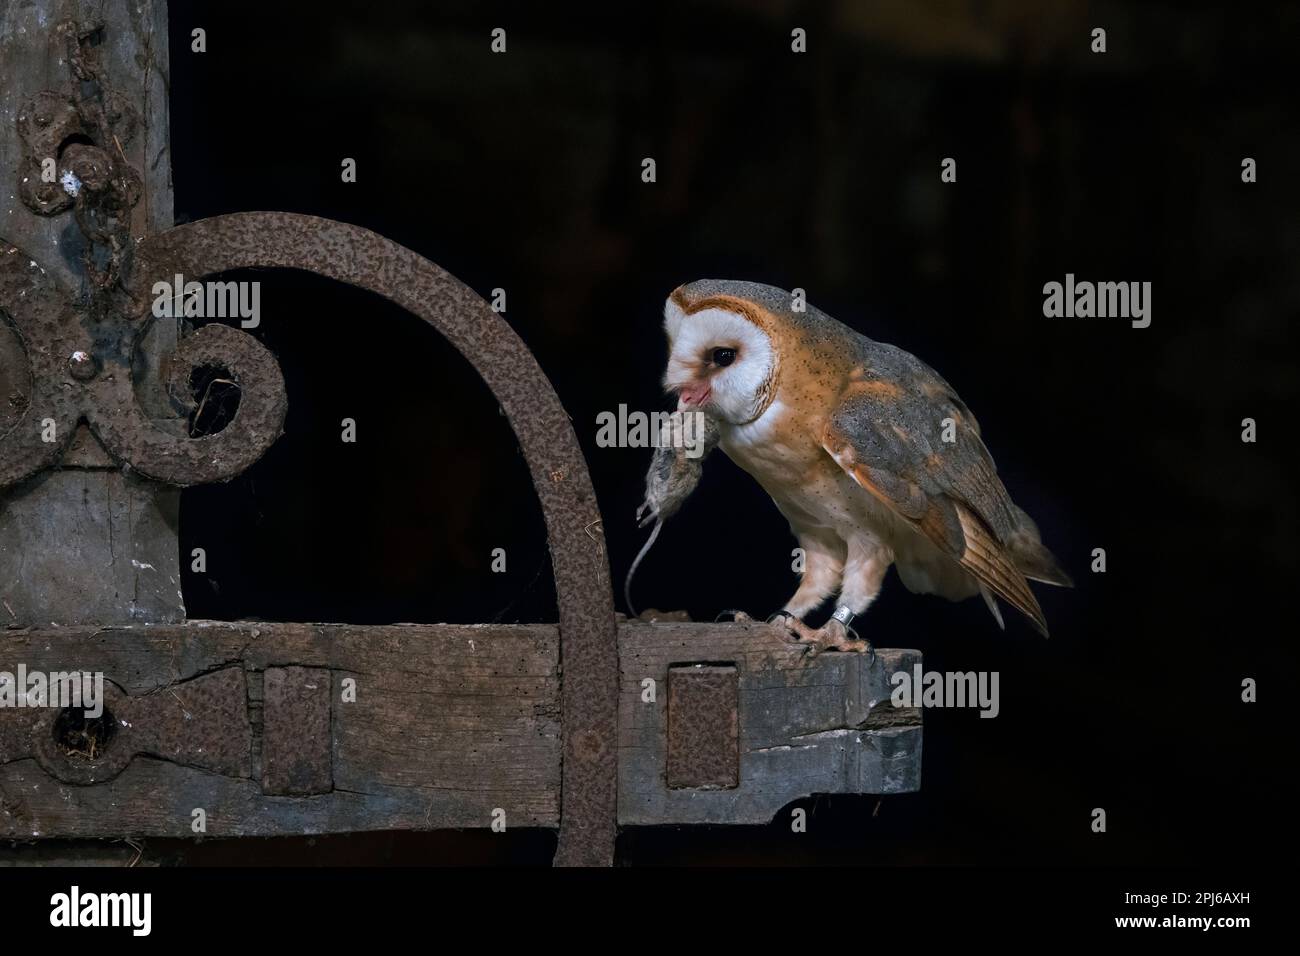 Common barn owl (Tyto alba) with caught mouse prey in beak, perched on old wooden agricultural machine at farm in the countryside at night Stock Photo